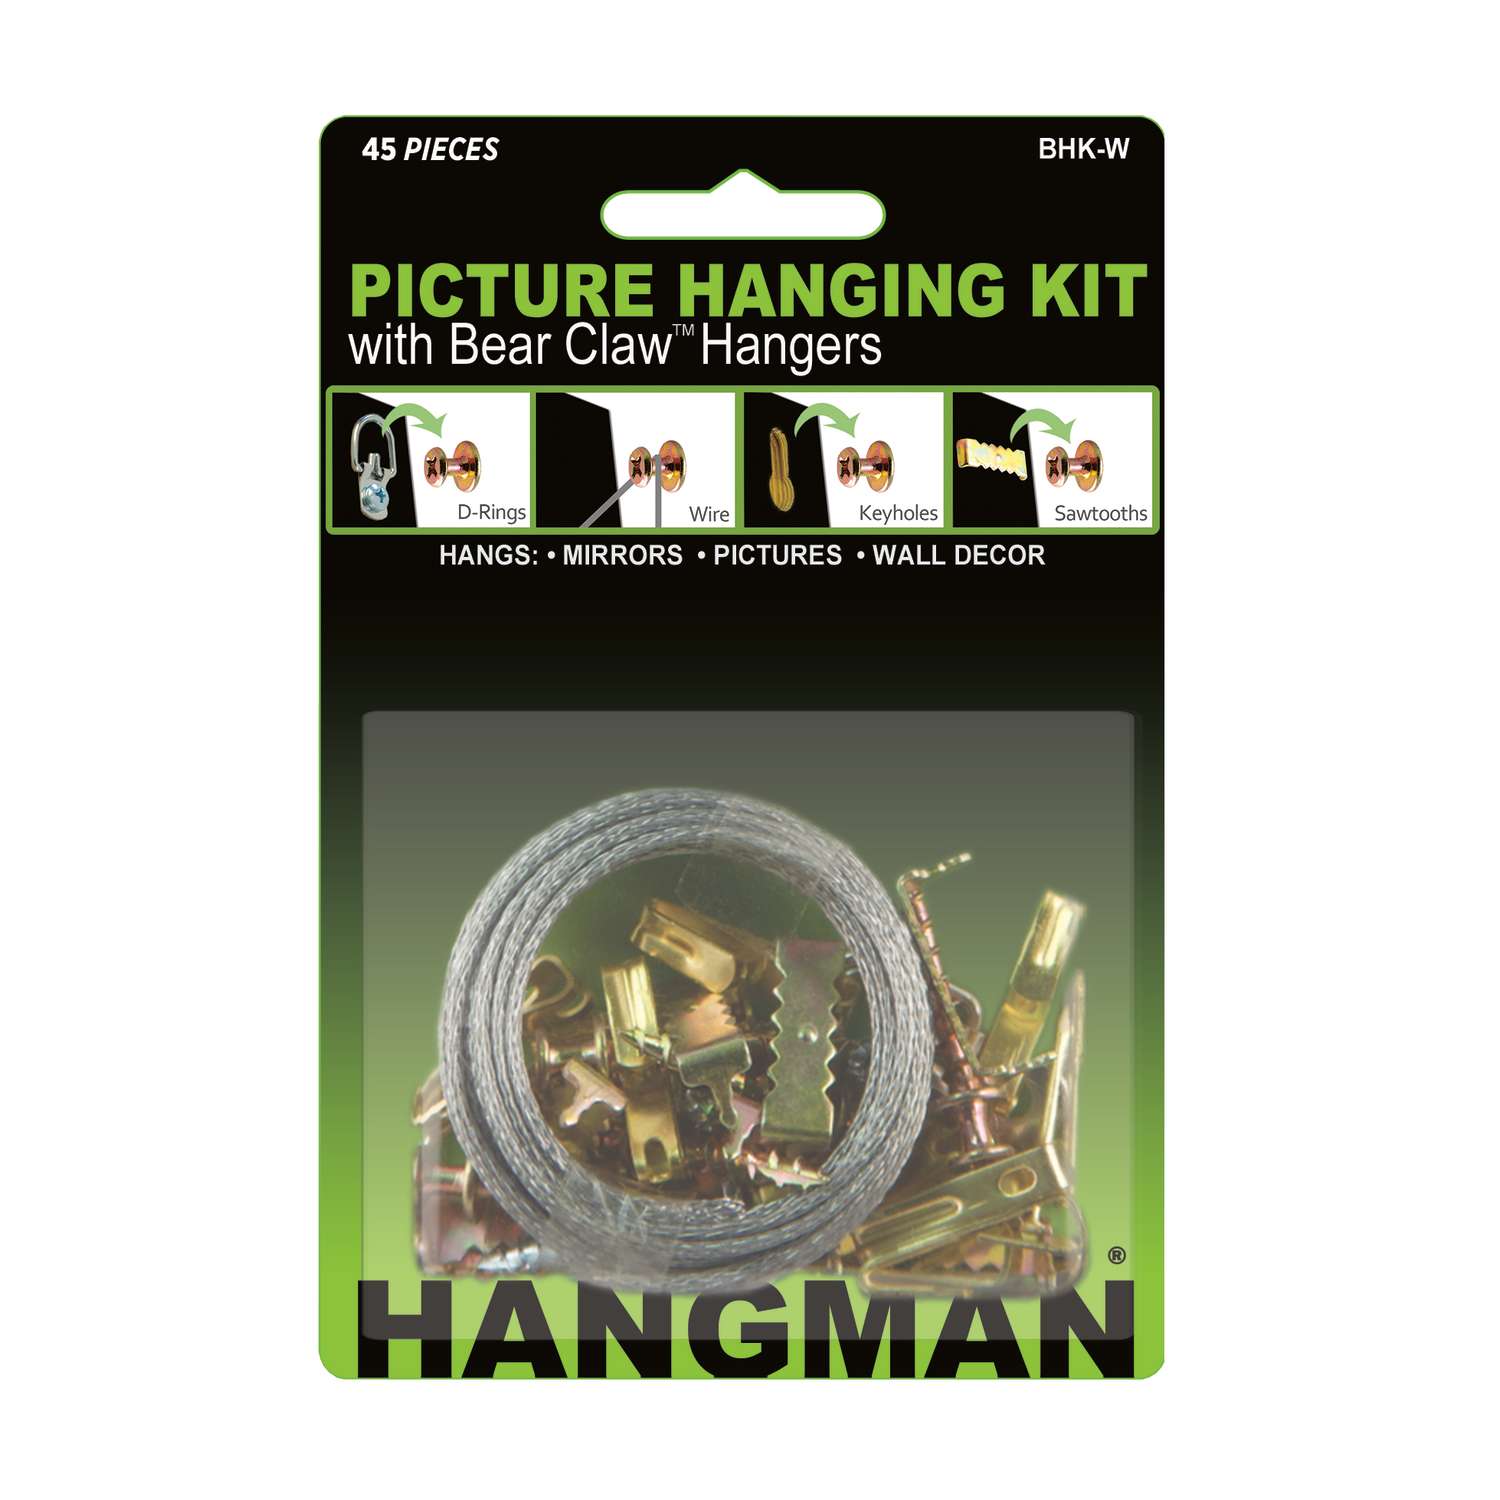 Hang and Level Yellow Hang and Level Picture Hanger 10 lb 1 each - Ace  Hardware